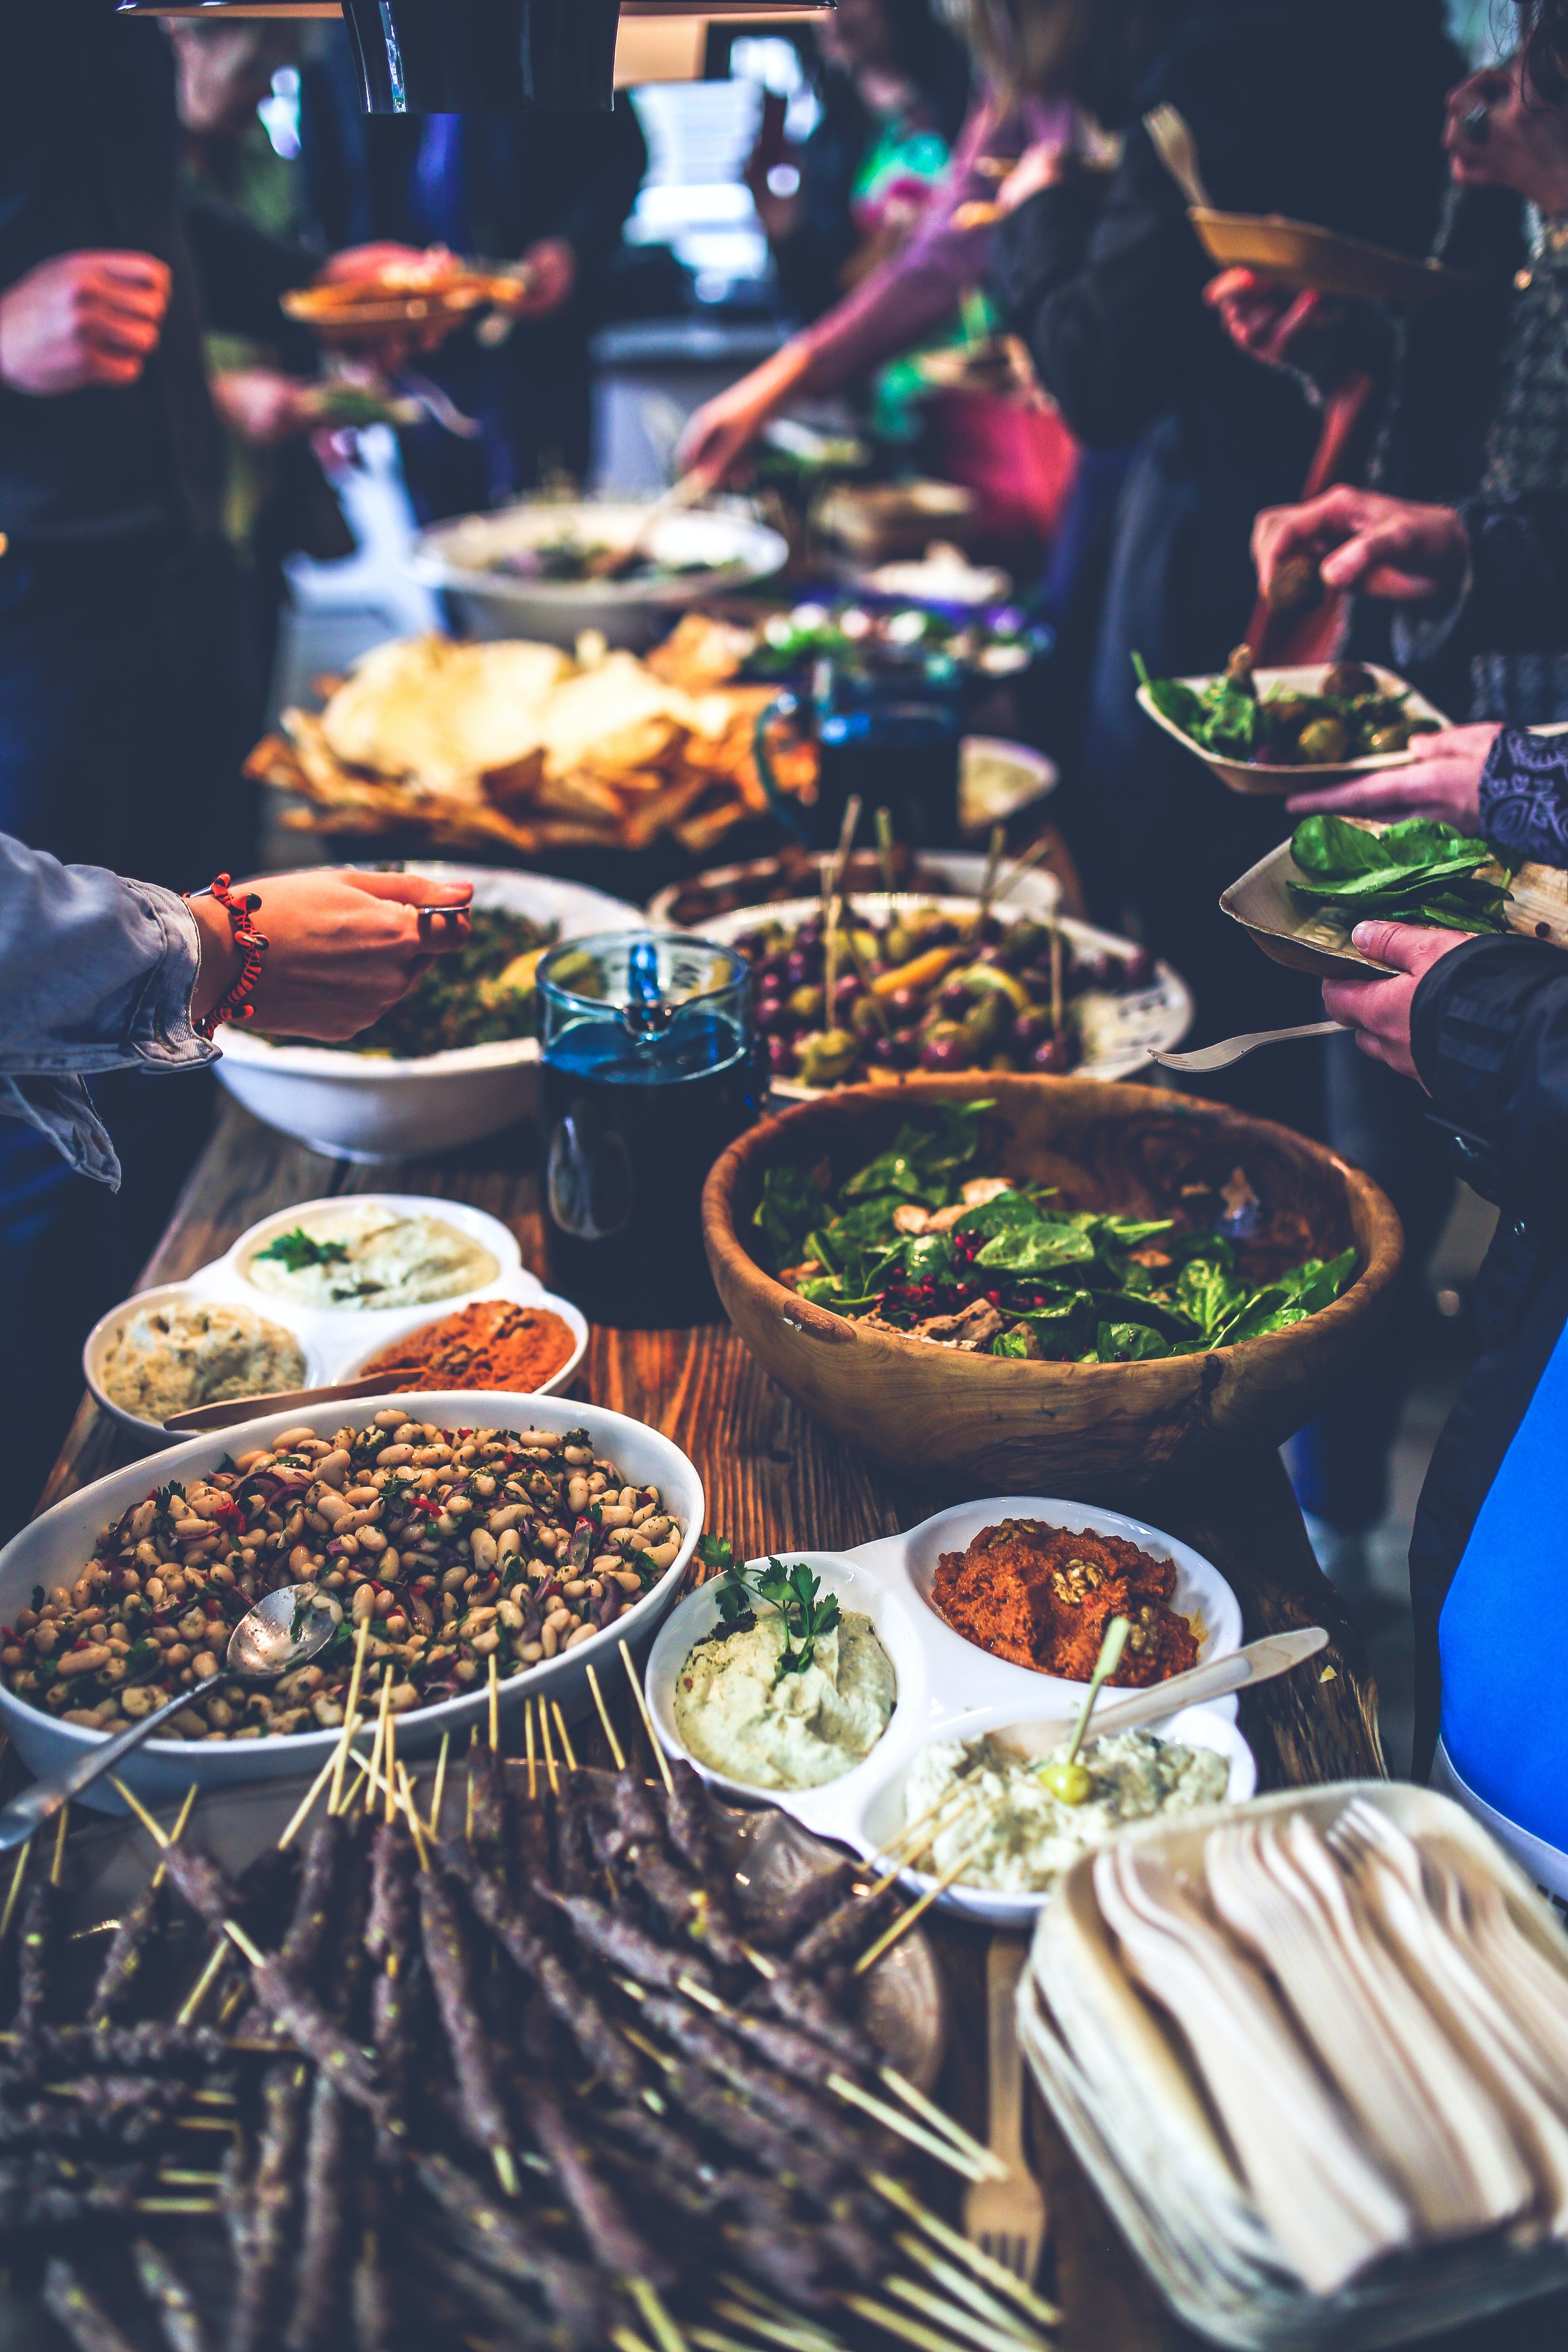 People dishing up at a buffet. | Pexels